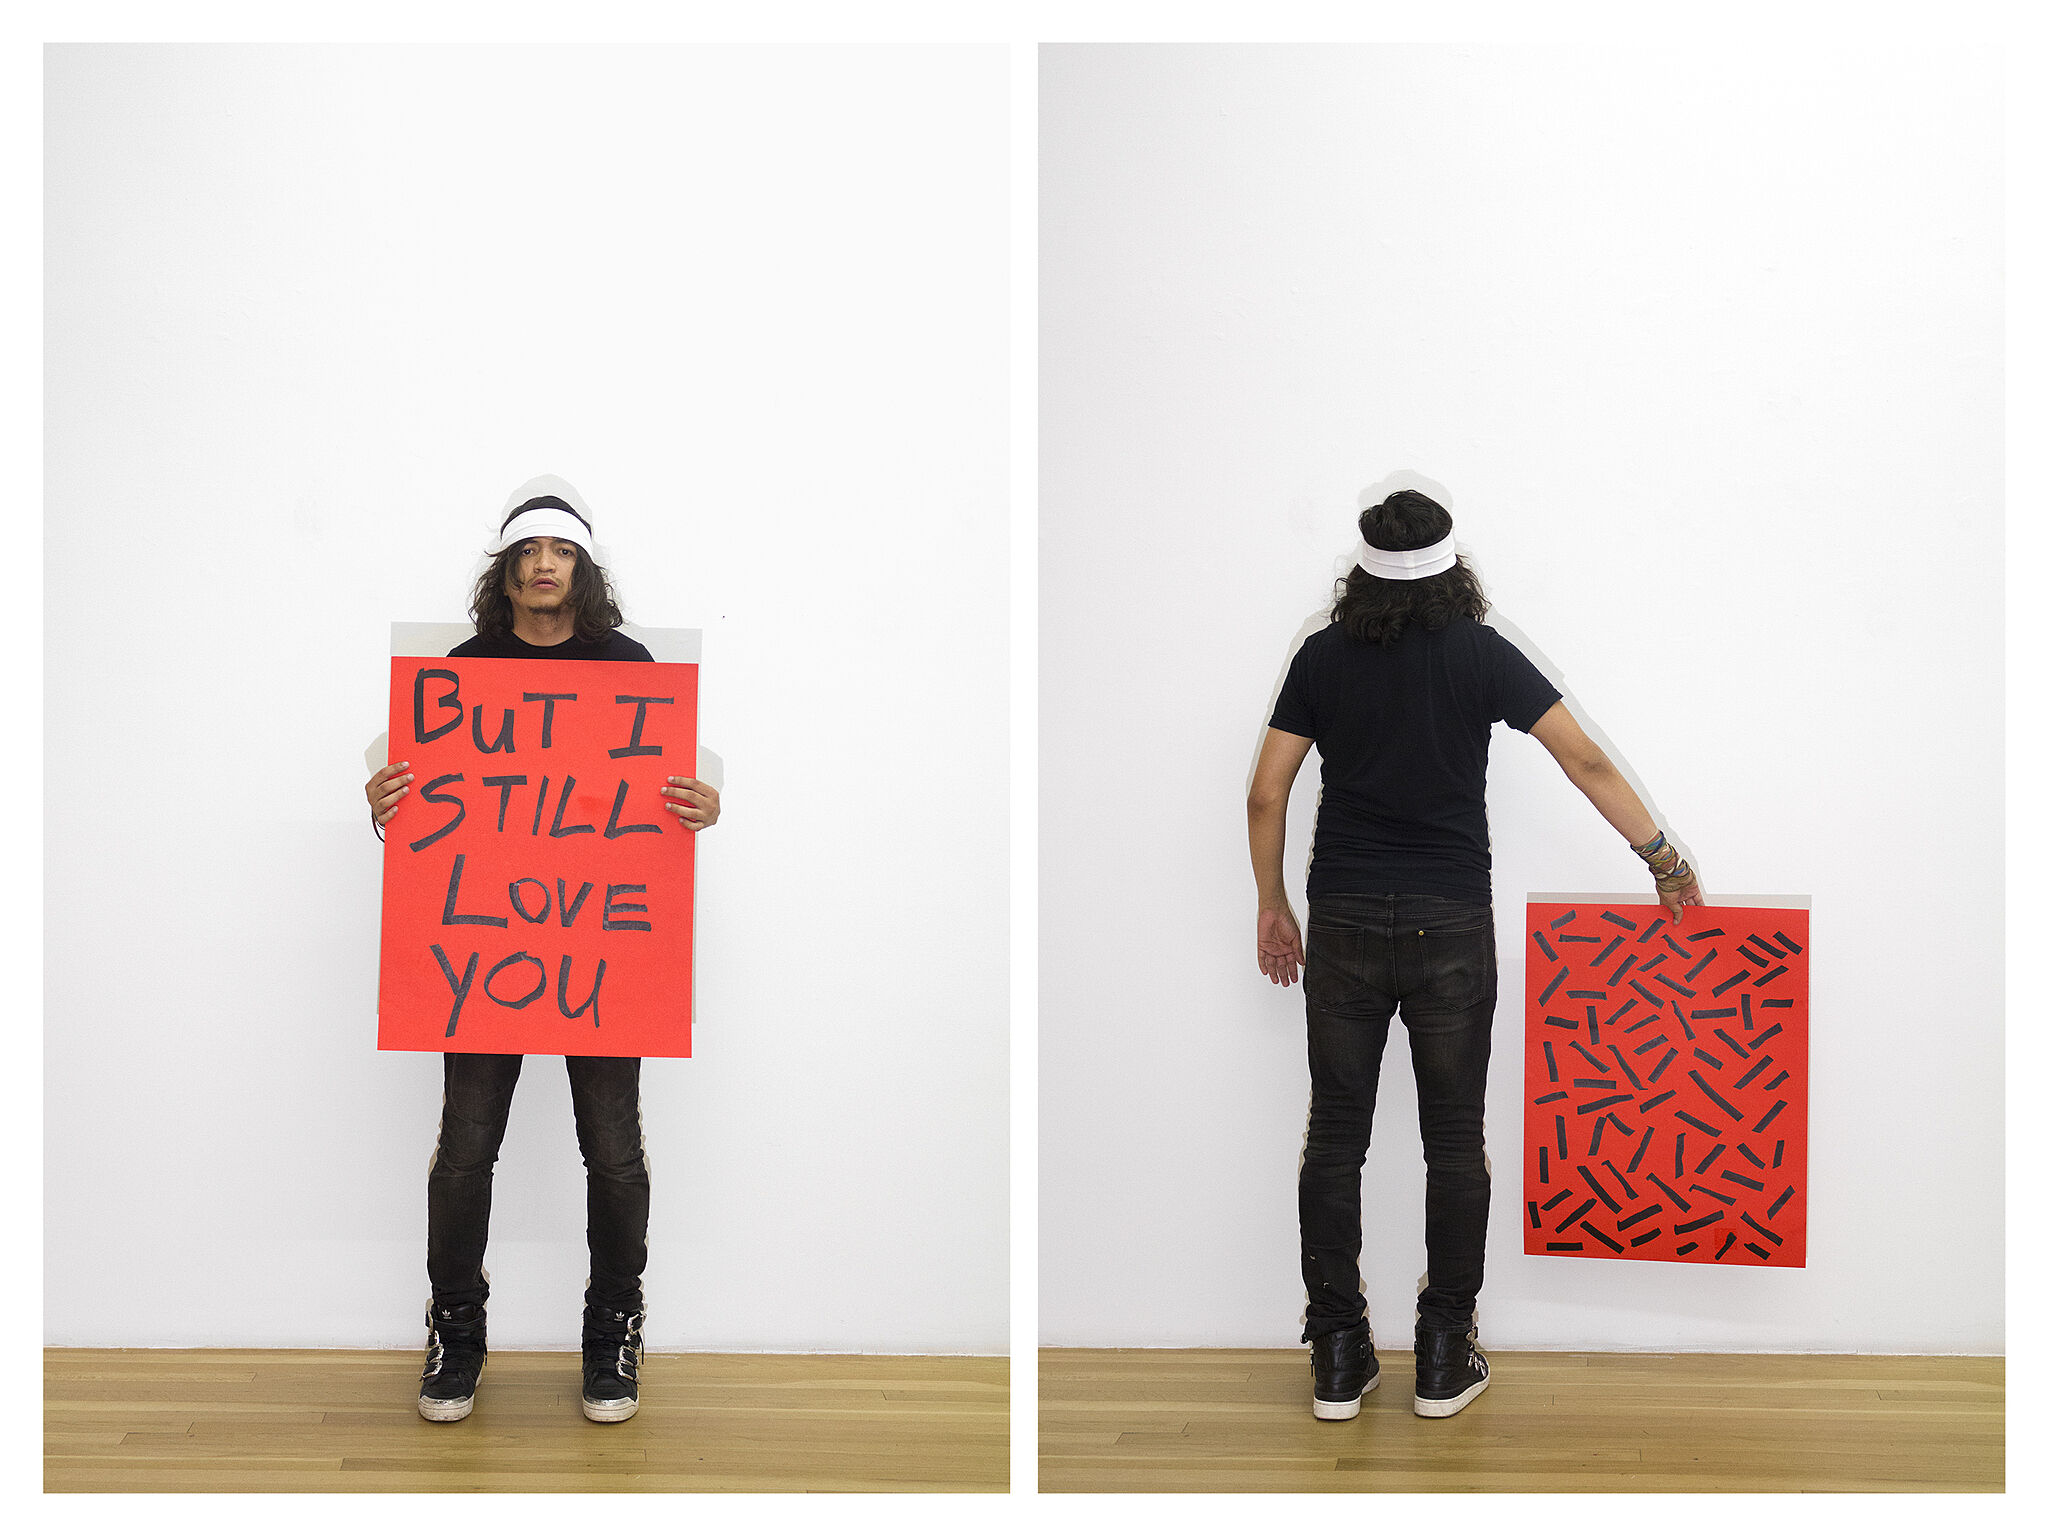 Two images of a man holding a red sign.